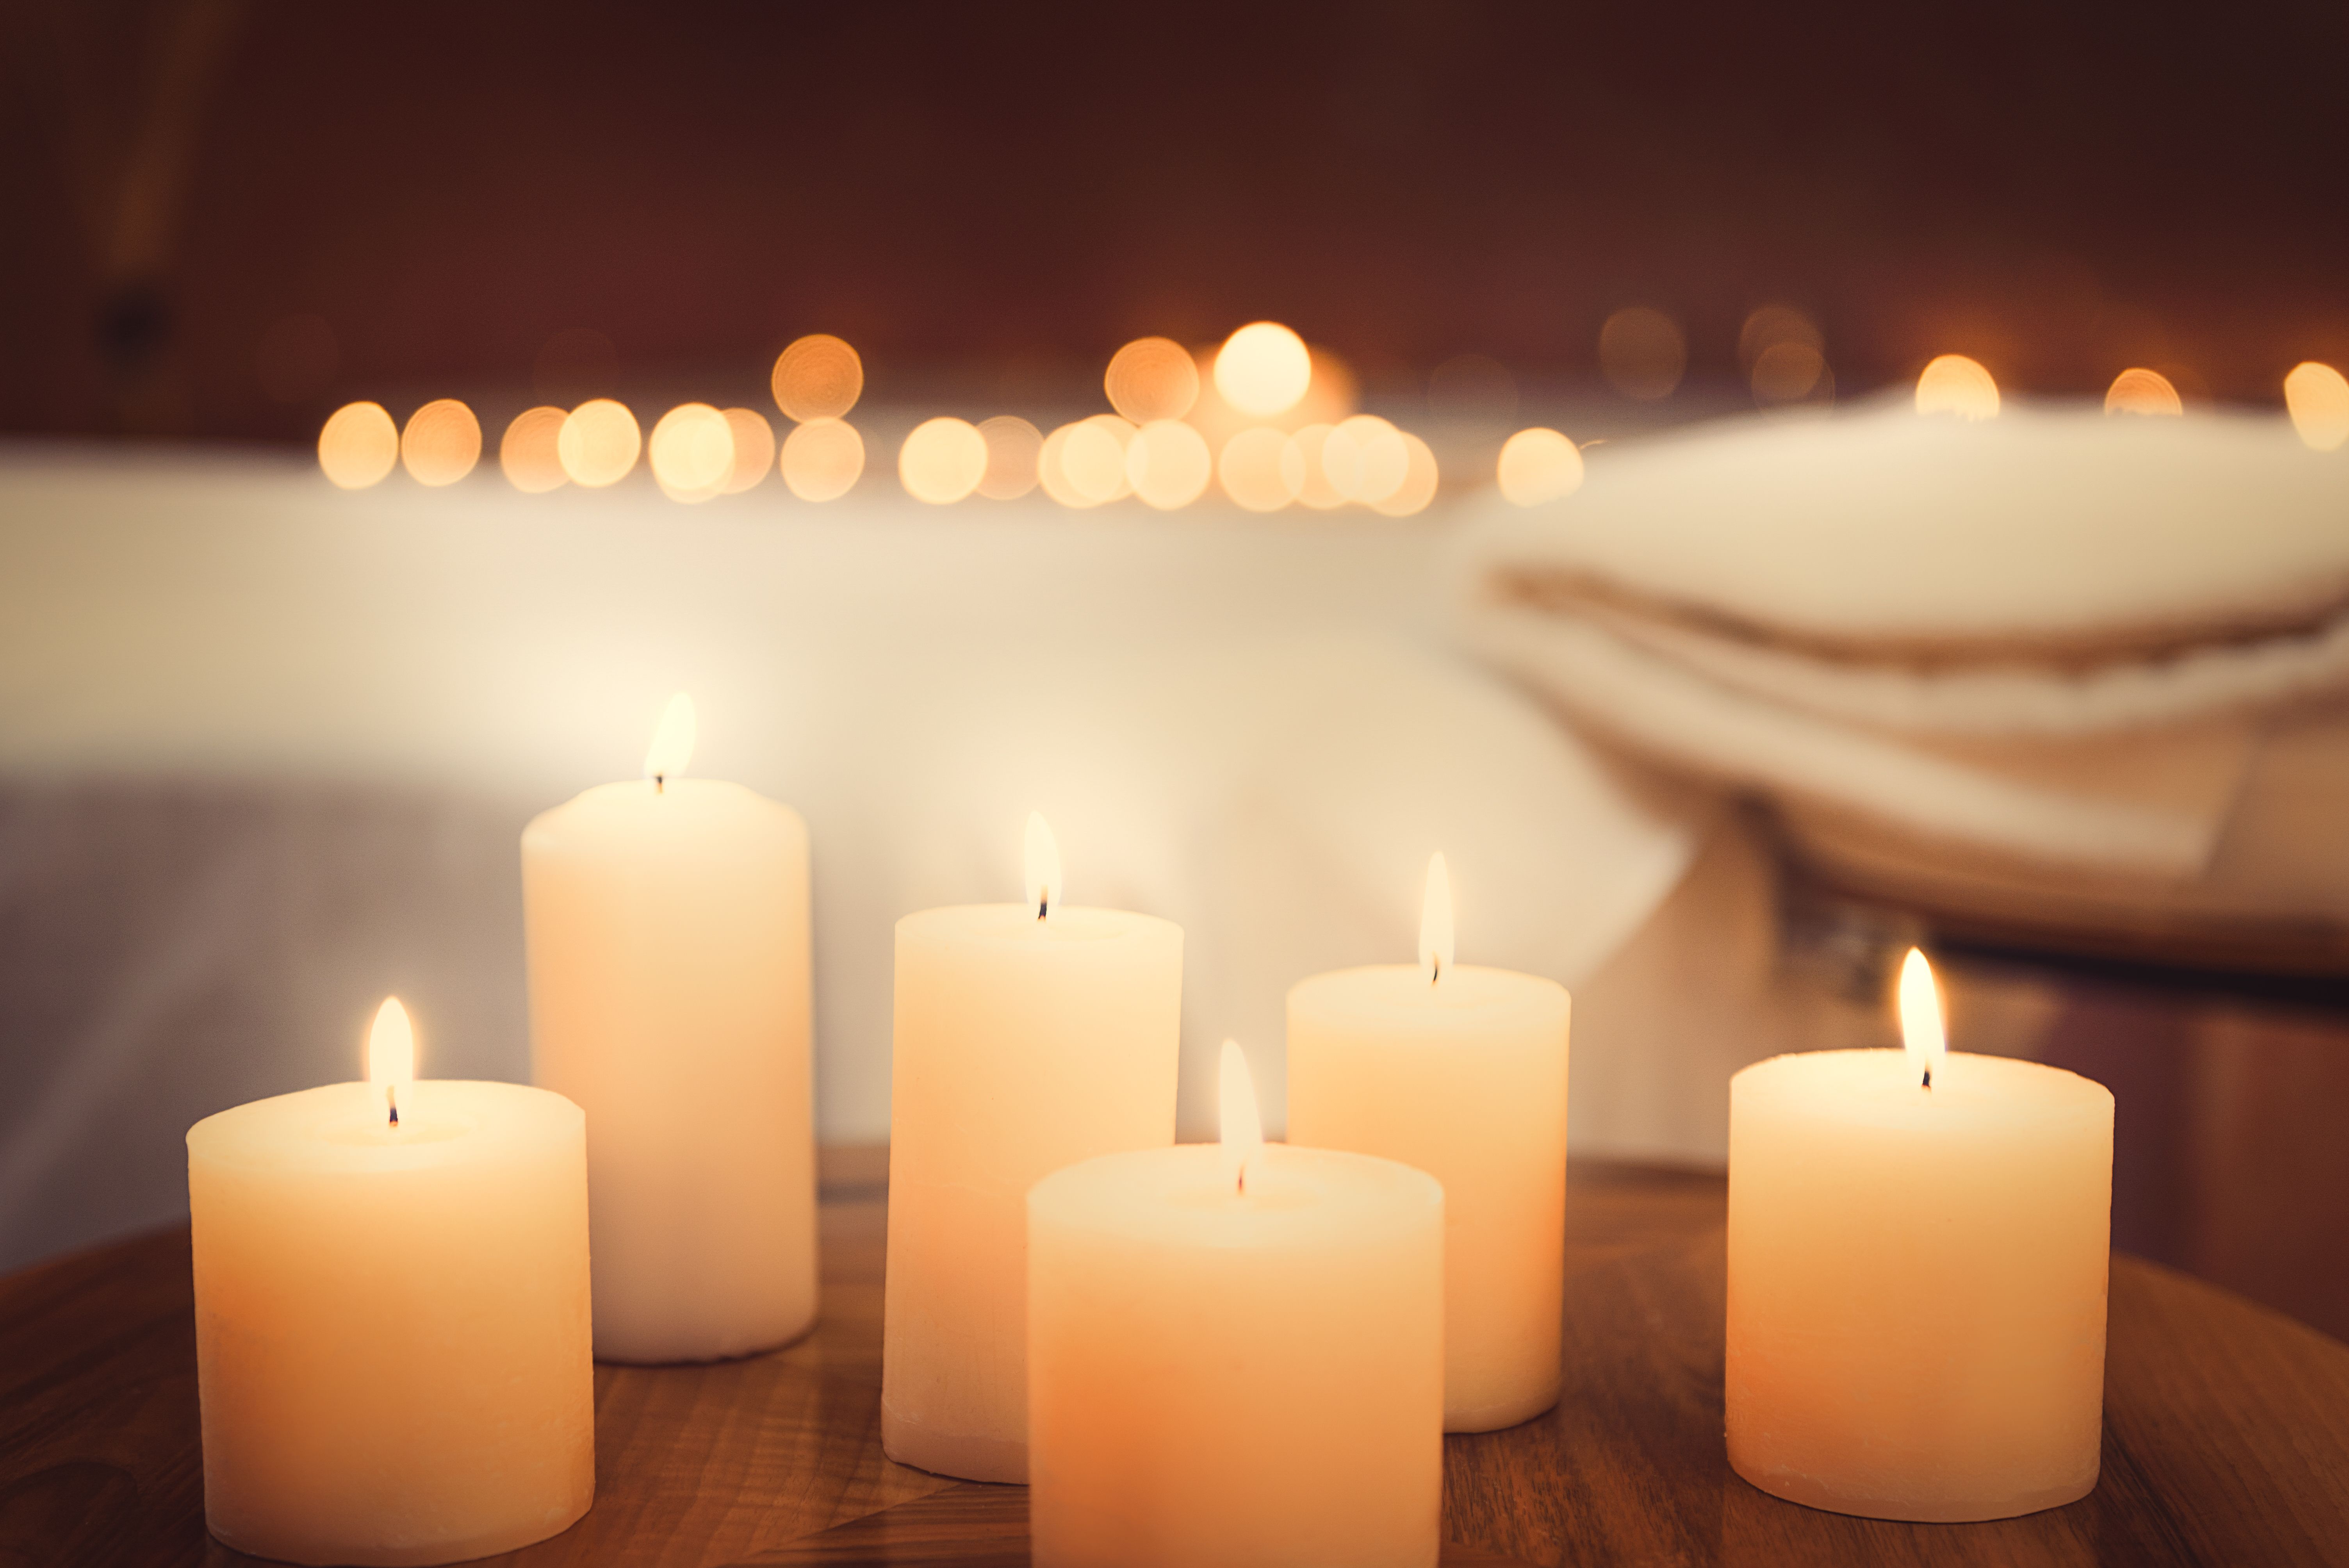 Lit candles | Source: Getty Images